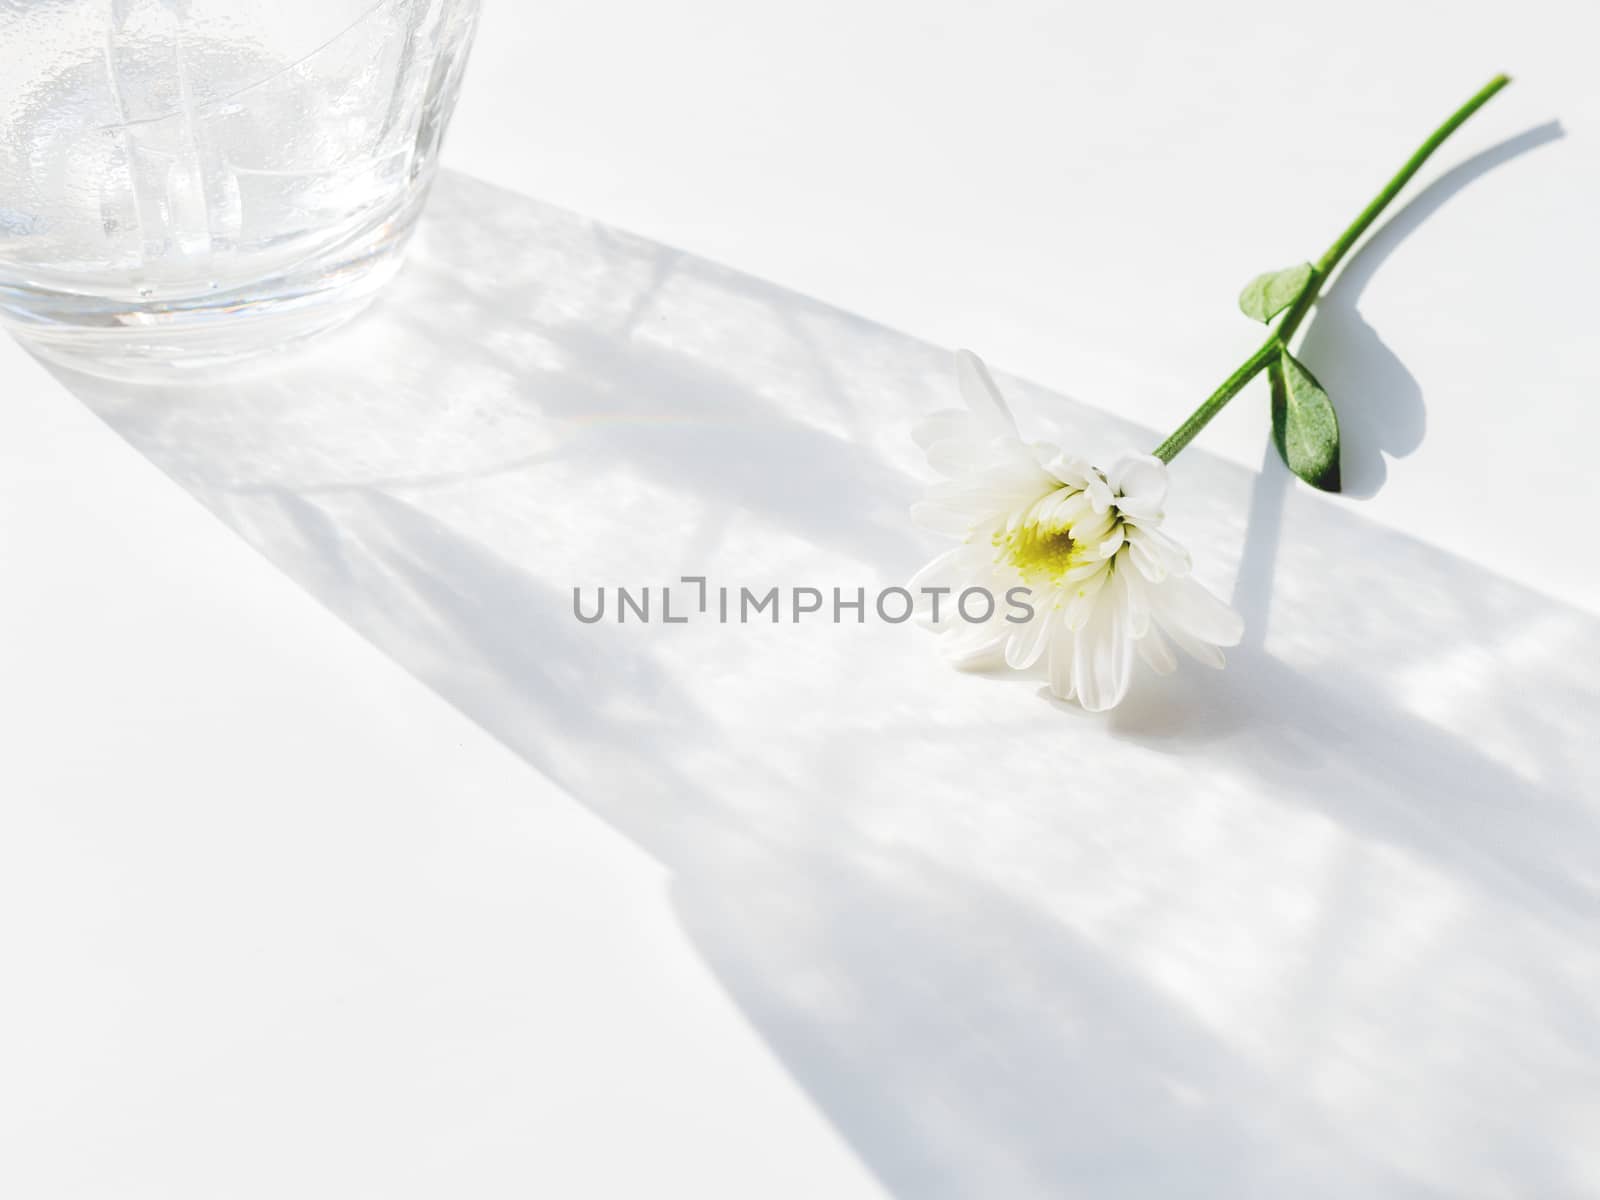 Blooming chrysanthemum flower lying in laced shadow of transparent glass vase.